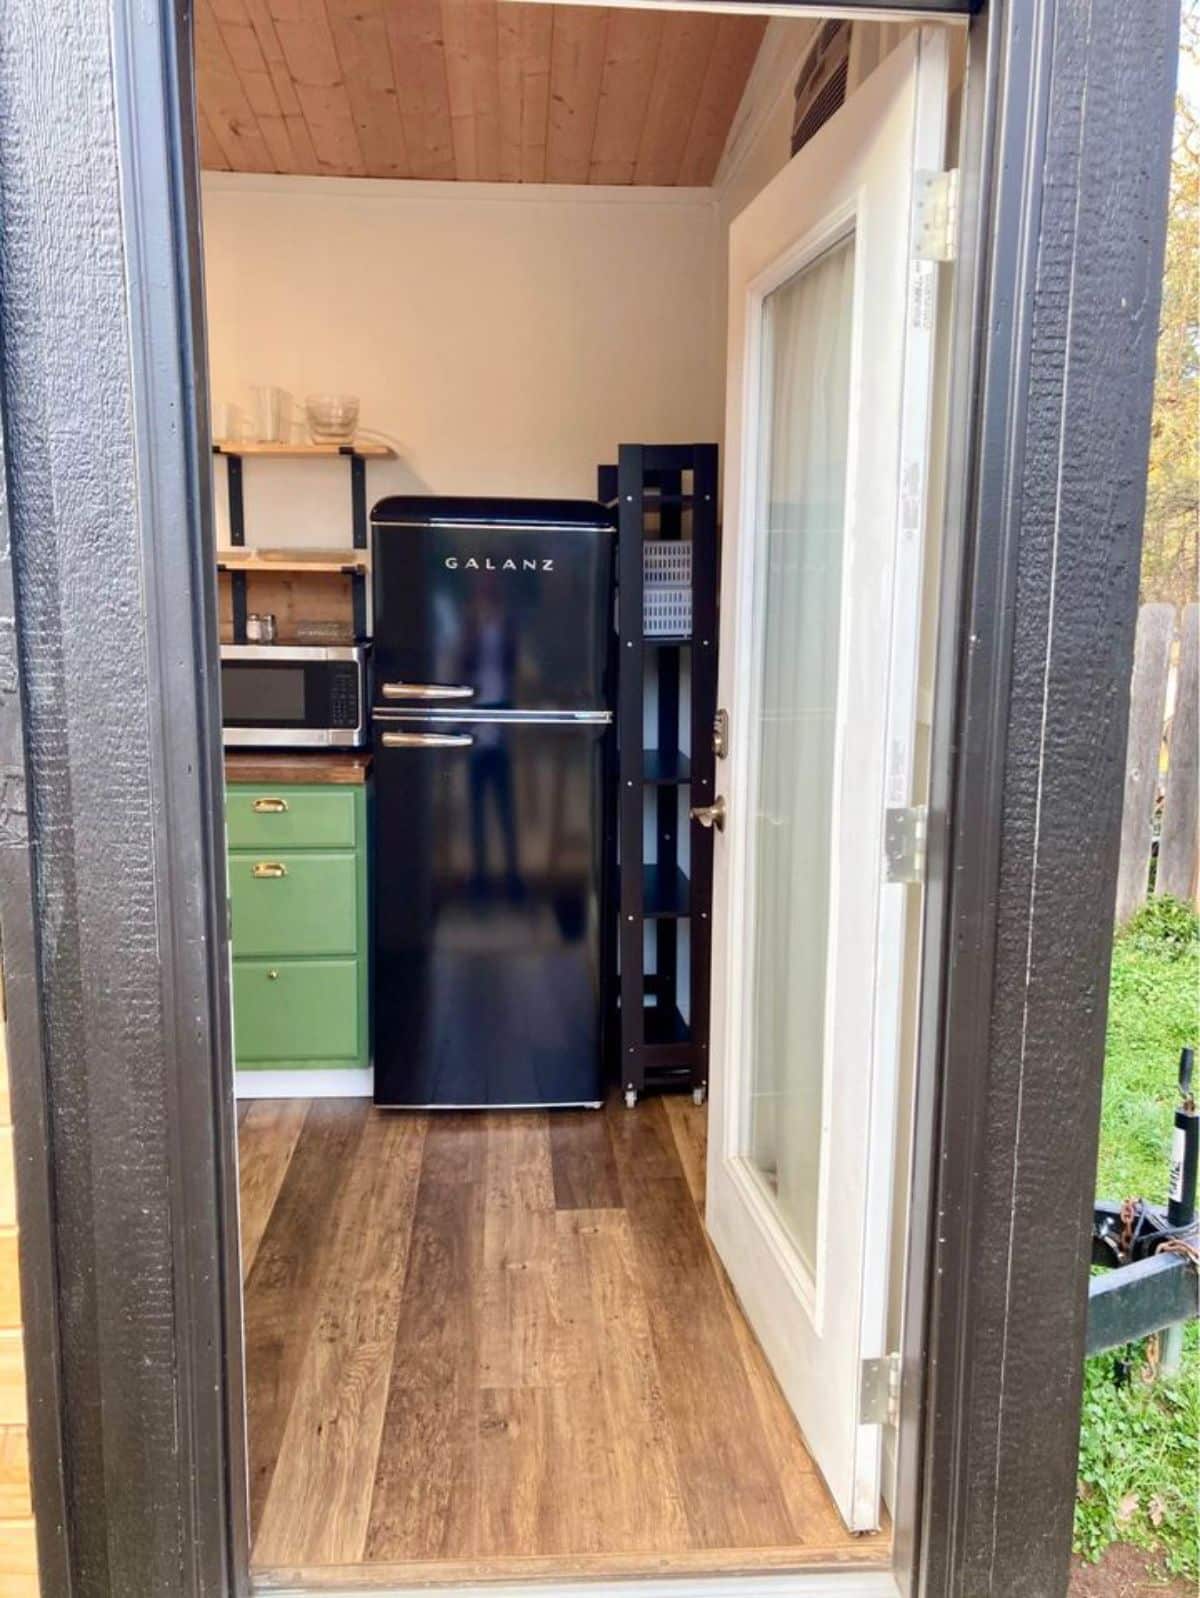 Kitchen area right in front of main entrance door of 25' Beautiful Tiny Home